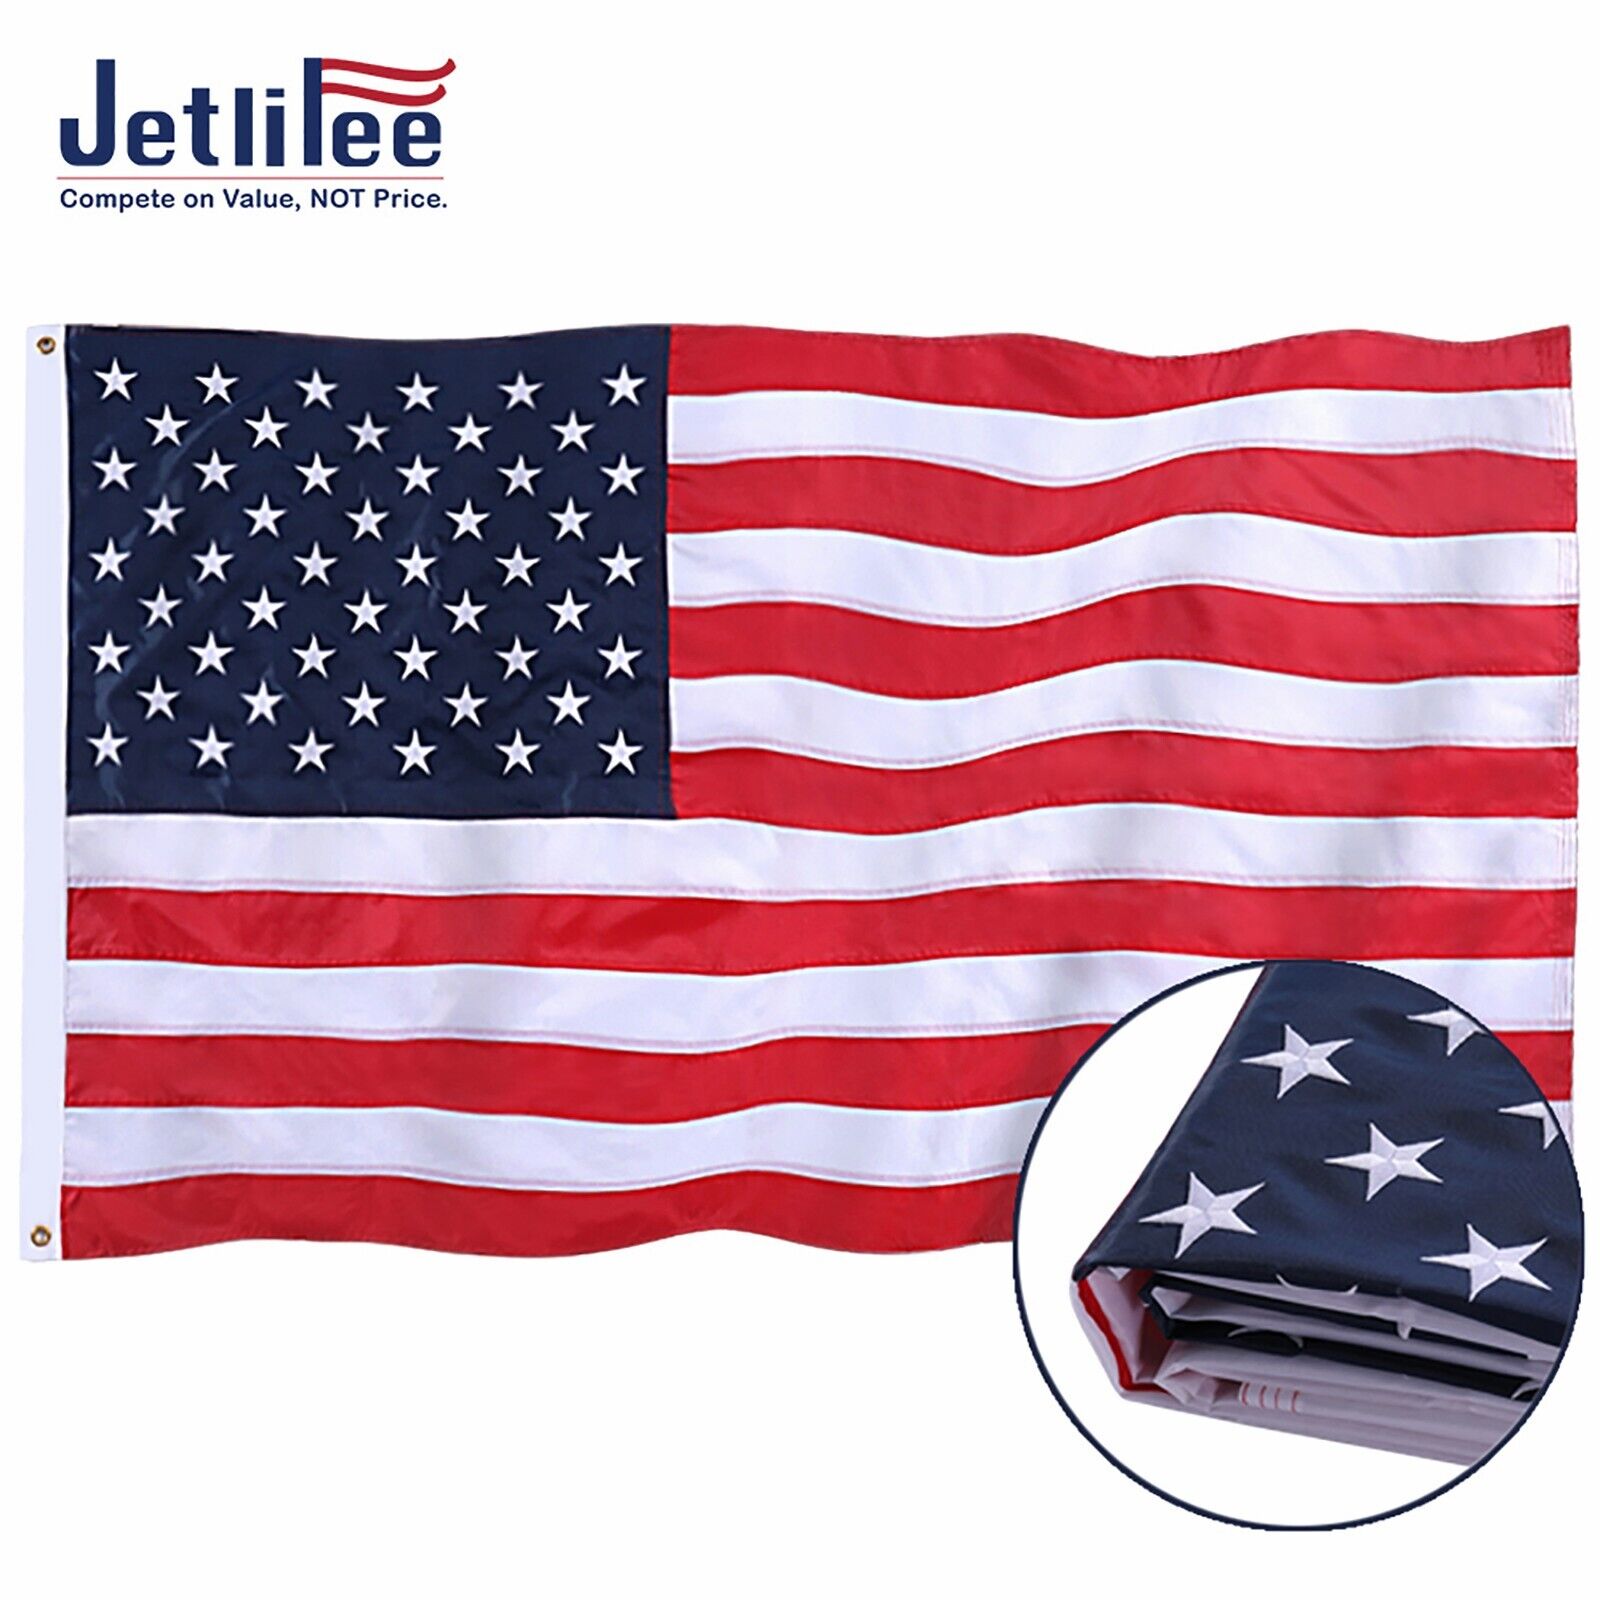 Jetlifee Heavy Duty 210D US American Flag - 4x6 ft with Embroidered Stars & UV P